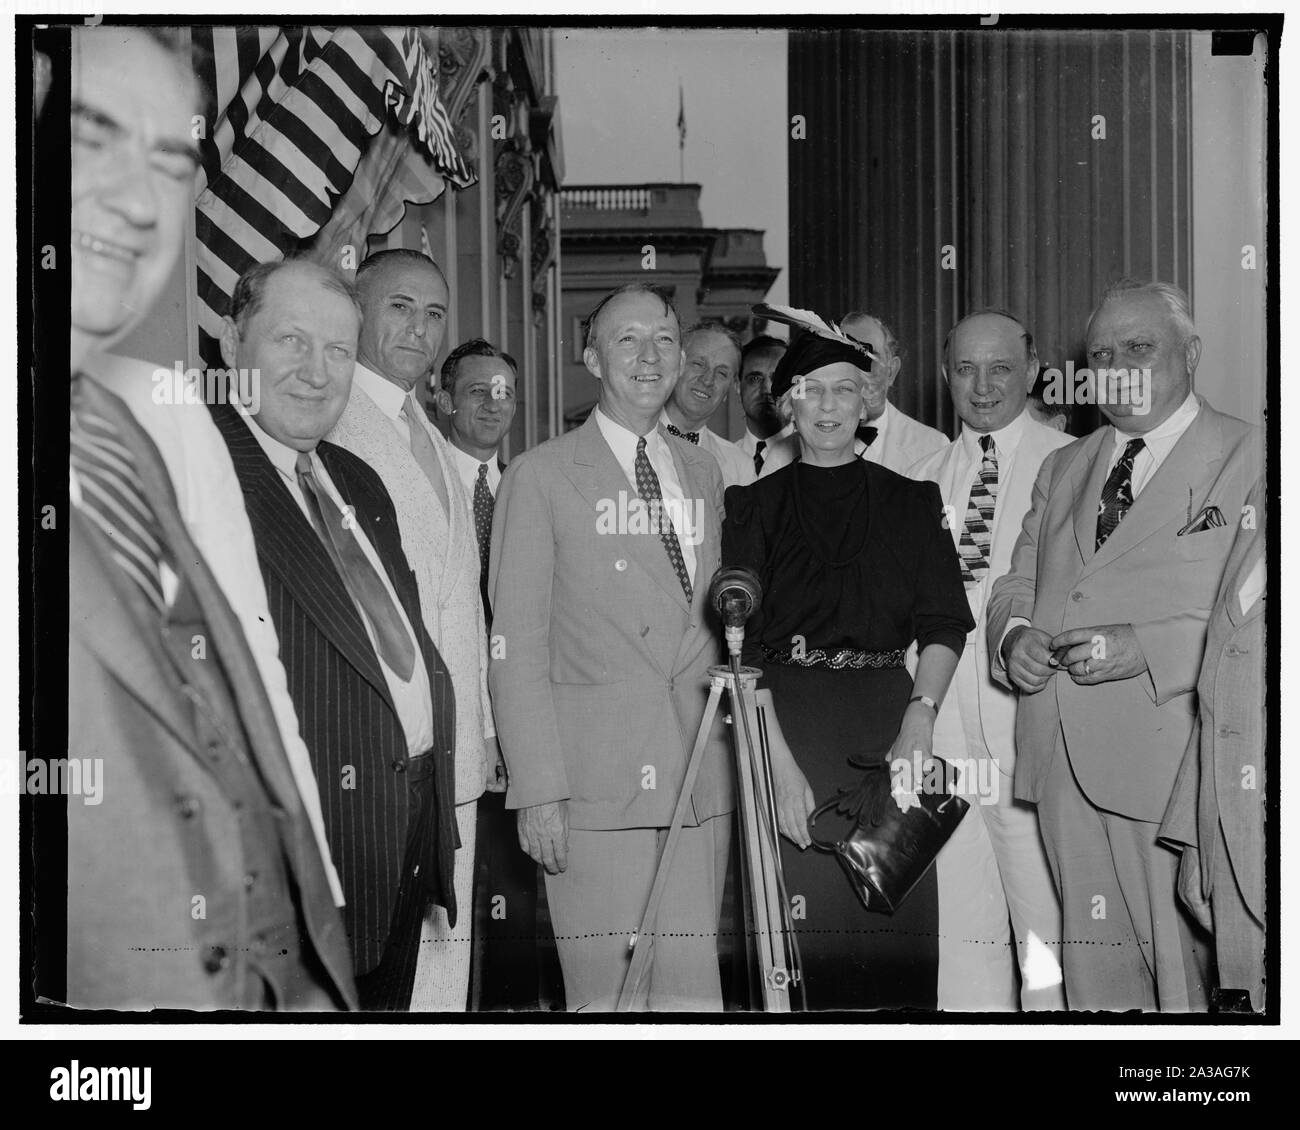 Senate confirms Black 63-16 Washington, D.C., Aug. 17. The new Associate Justice of the Supreme Court with Mrs. Hugo L. Black were all smiles as they were surrounded by the Senate colleagues of Black following his confirmation by the Seante 63-16. In the photograph, left to right: Senators Fred H. Brown, New Hampshire; M.M. Neely, West Virginia; Carl A. Hatch, New Mexico; Justice Black, Senators Henry A. Ashurst, Arizona; Sherman Minton, Indiana; Mrs Black; Senators George McGill, Kansas; and WIlliam Dieterich, Illinois, 8/17/37 Stock Photo